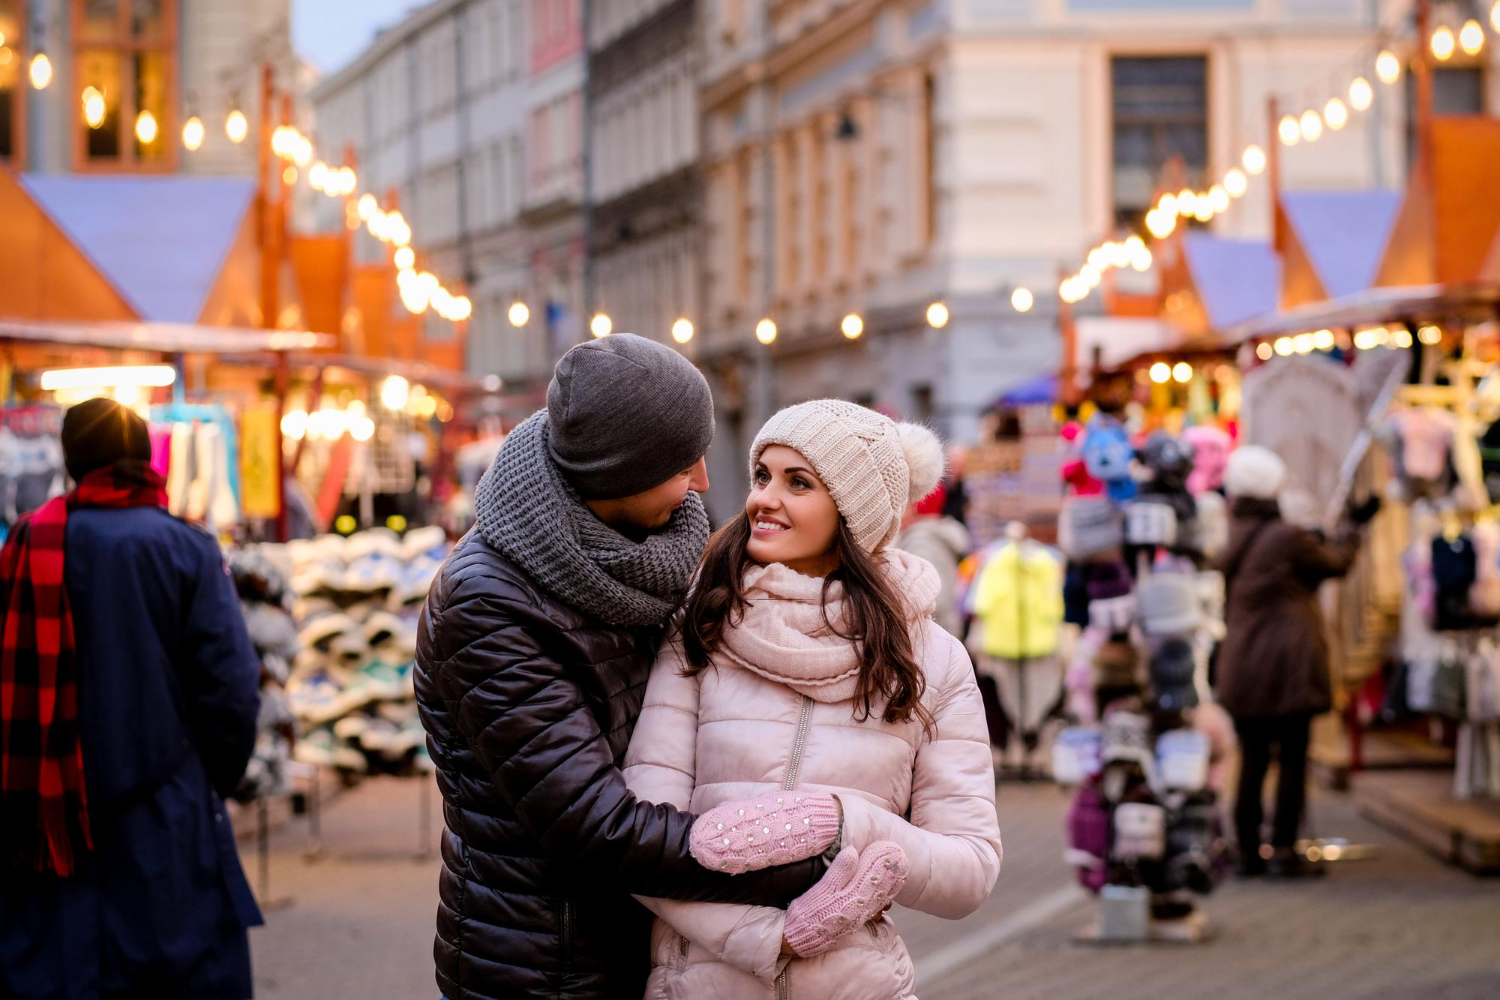 A couple embracing and looking at each other in a Christmas market.